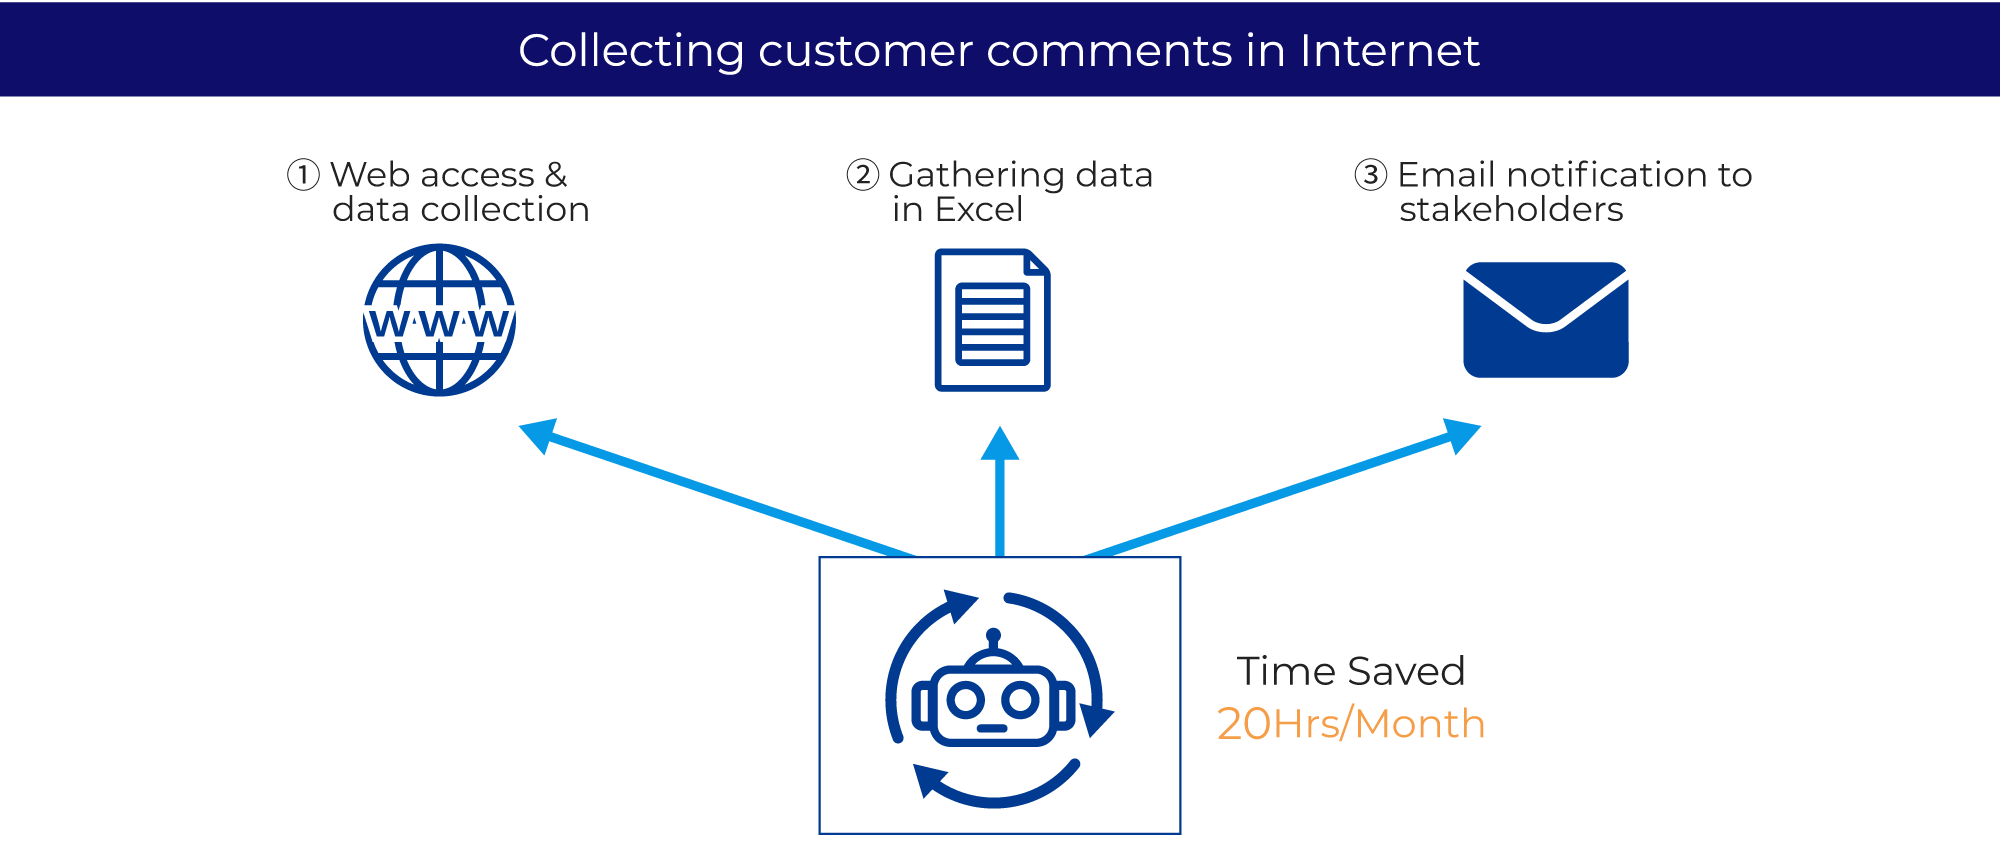 [Collecting customer comments in Internet] ①Web access & data collection②Gathering data in Excel③Email notification to stakeholders→Time Saved 20Hrs/Month